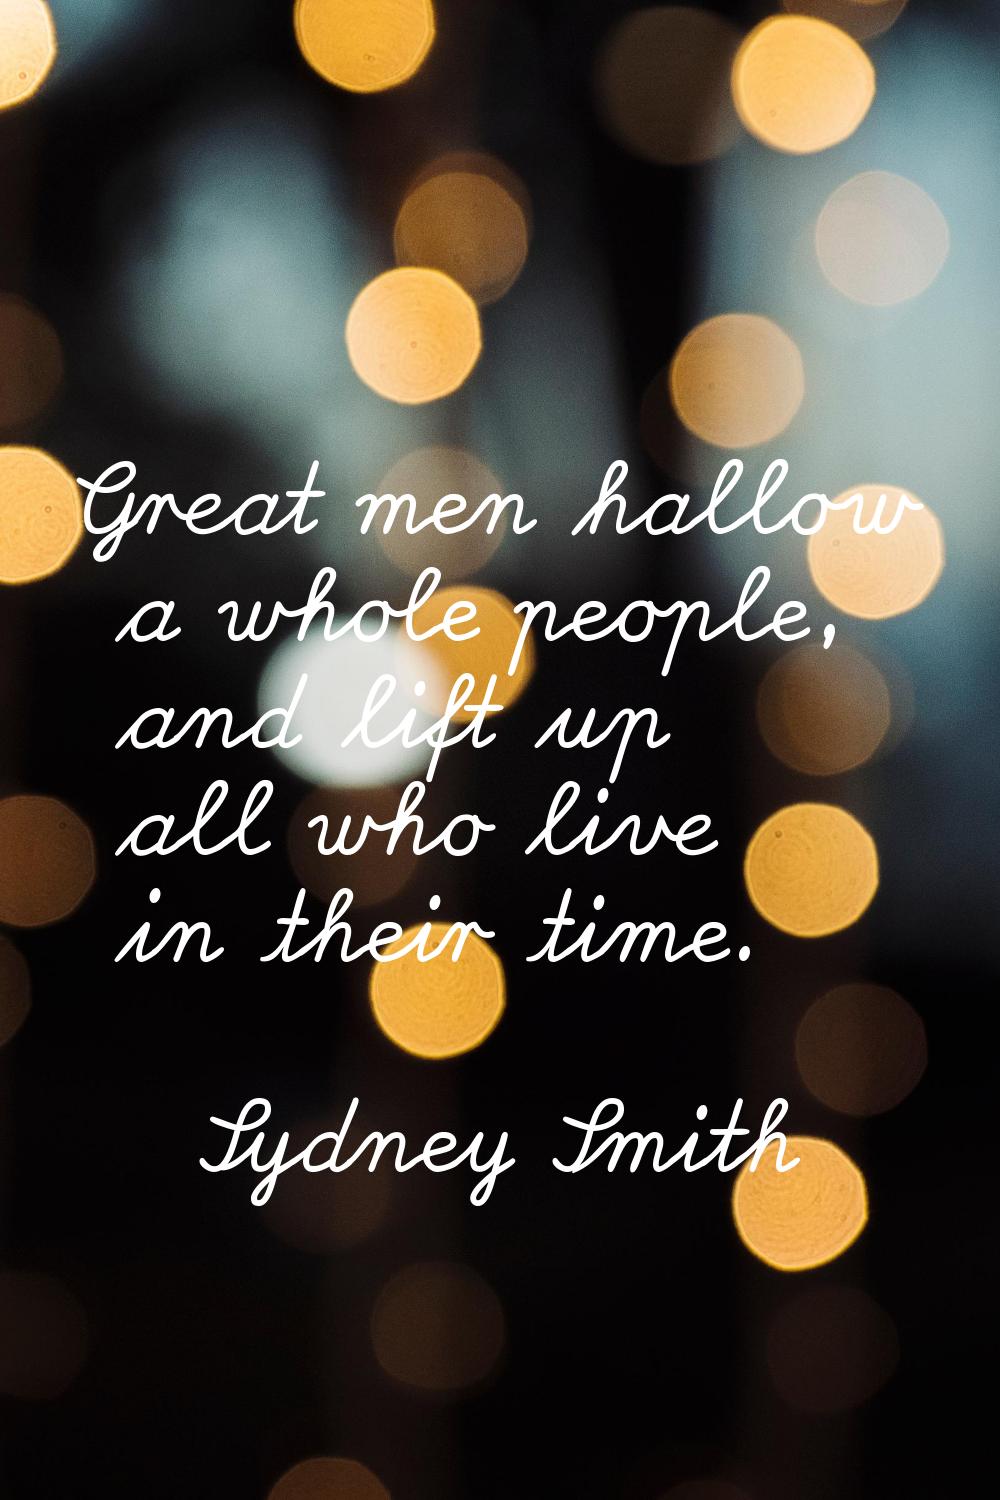 Great men hallow a whole people, and lift up all who live in their time.